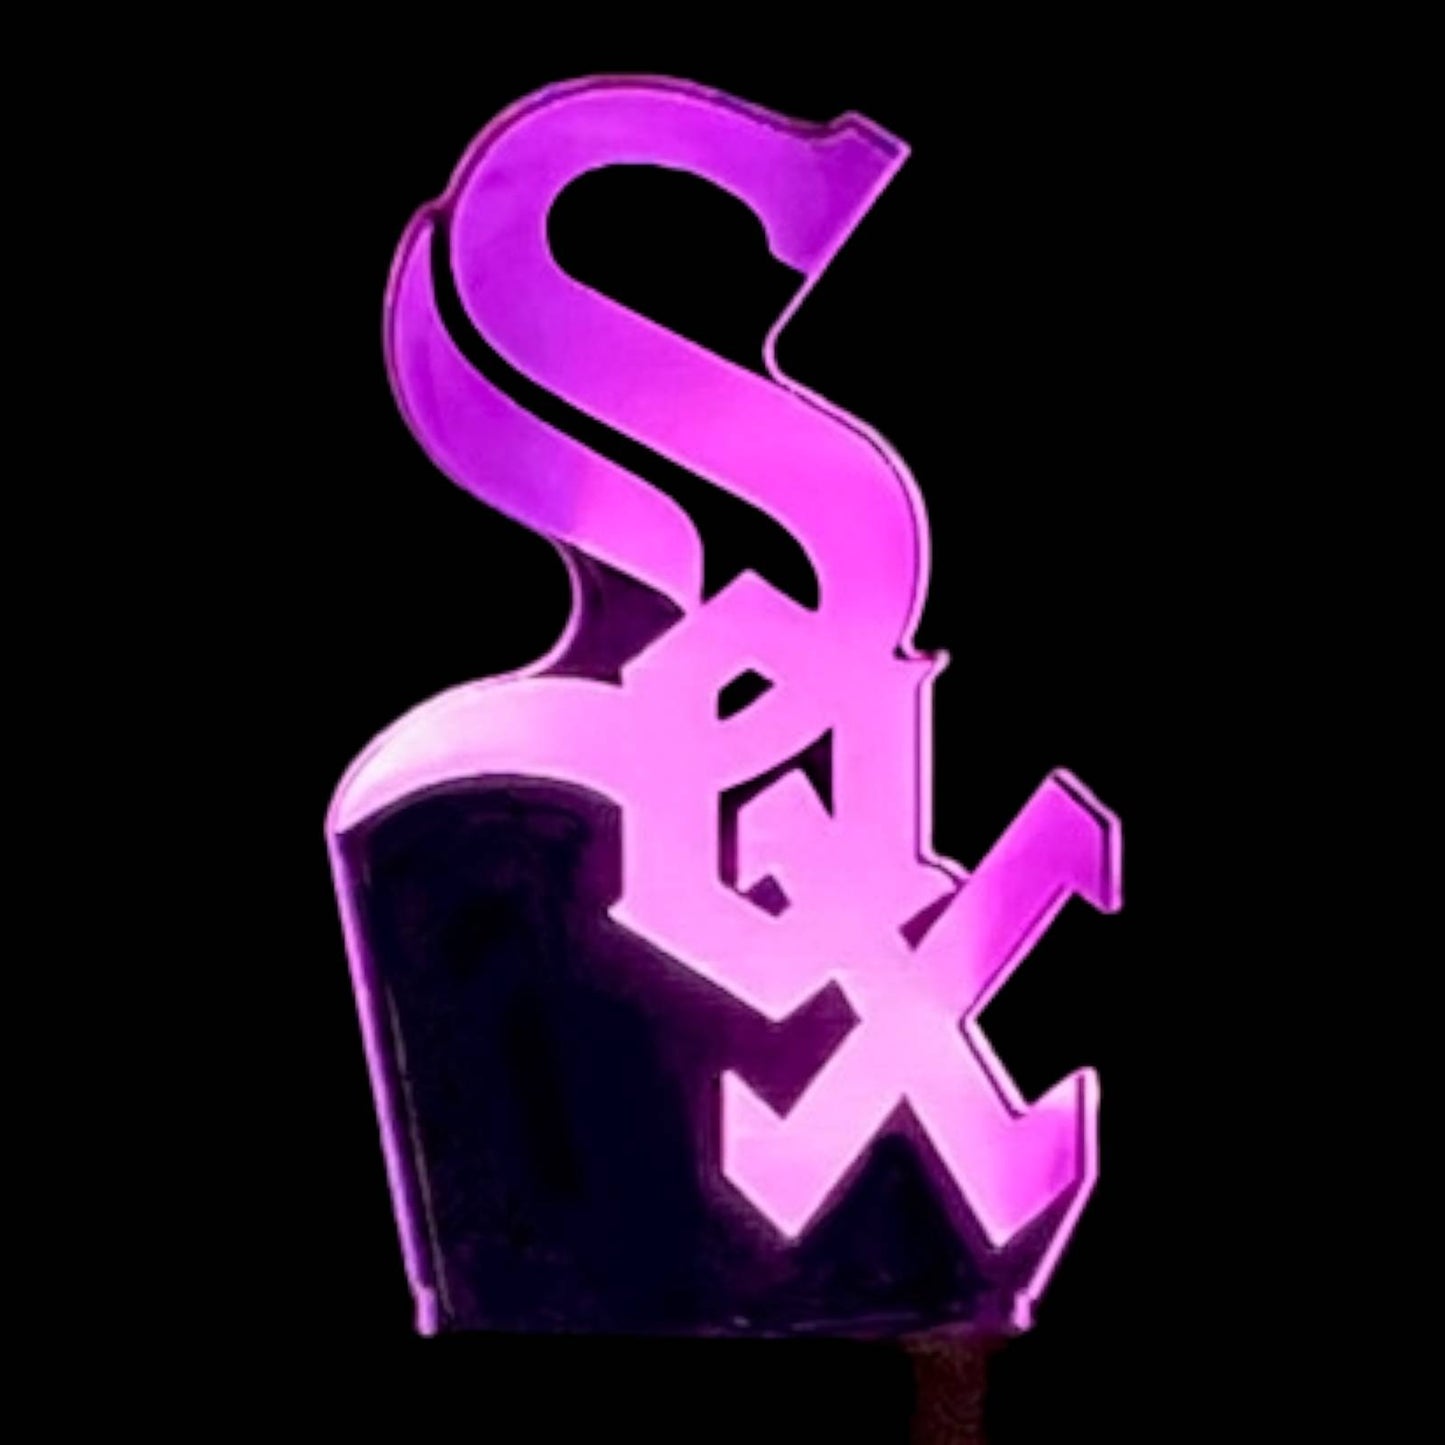 Chicago White Sox 3D LED Night-Light 7 Color Changing Lamp w/ Touch Switch